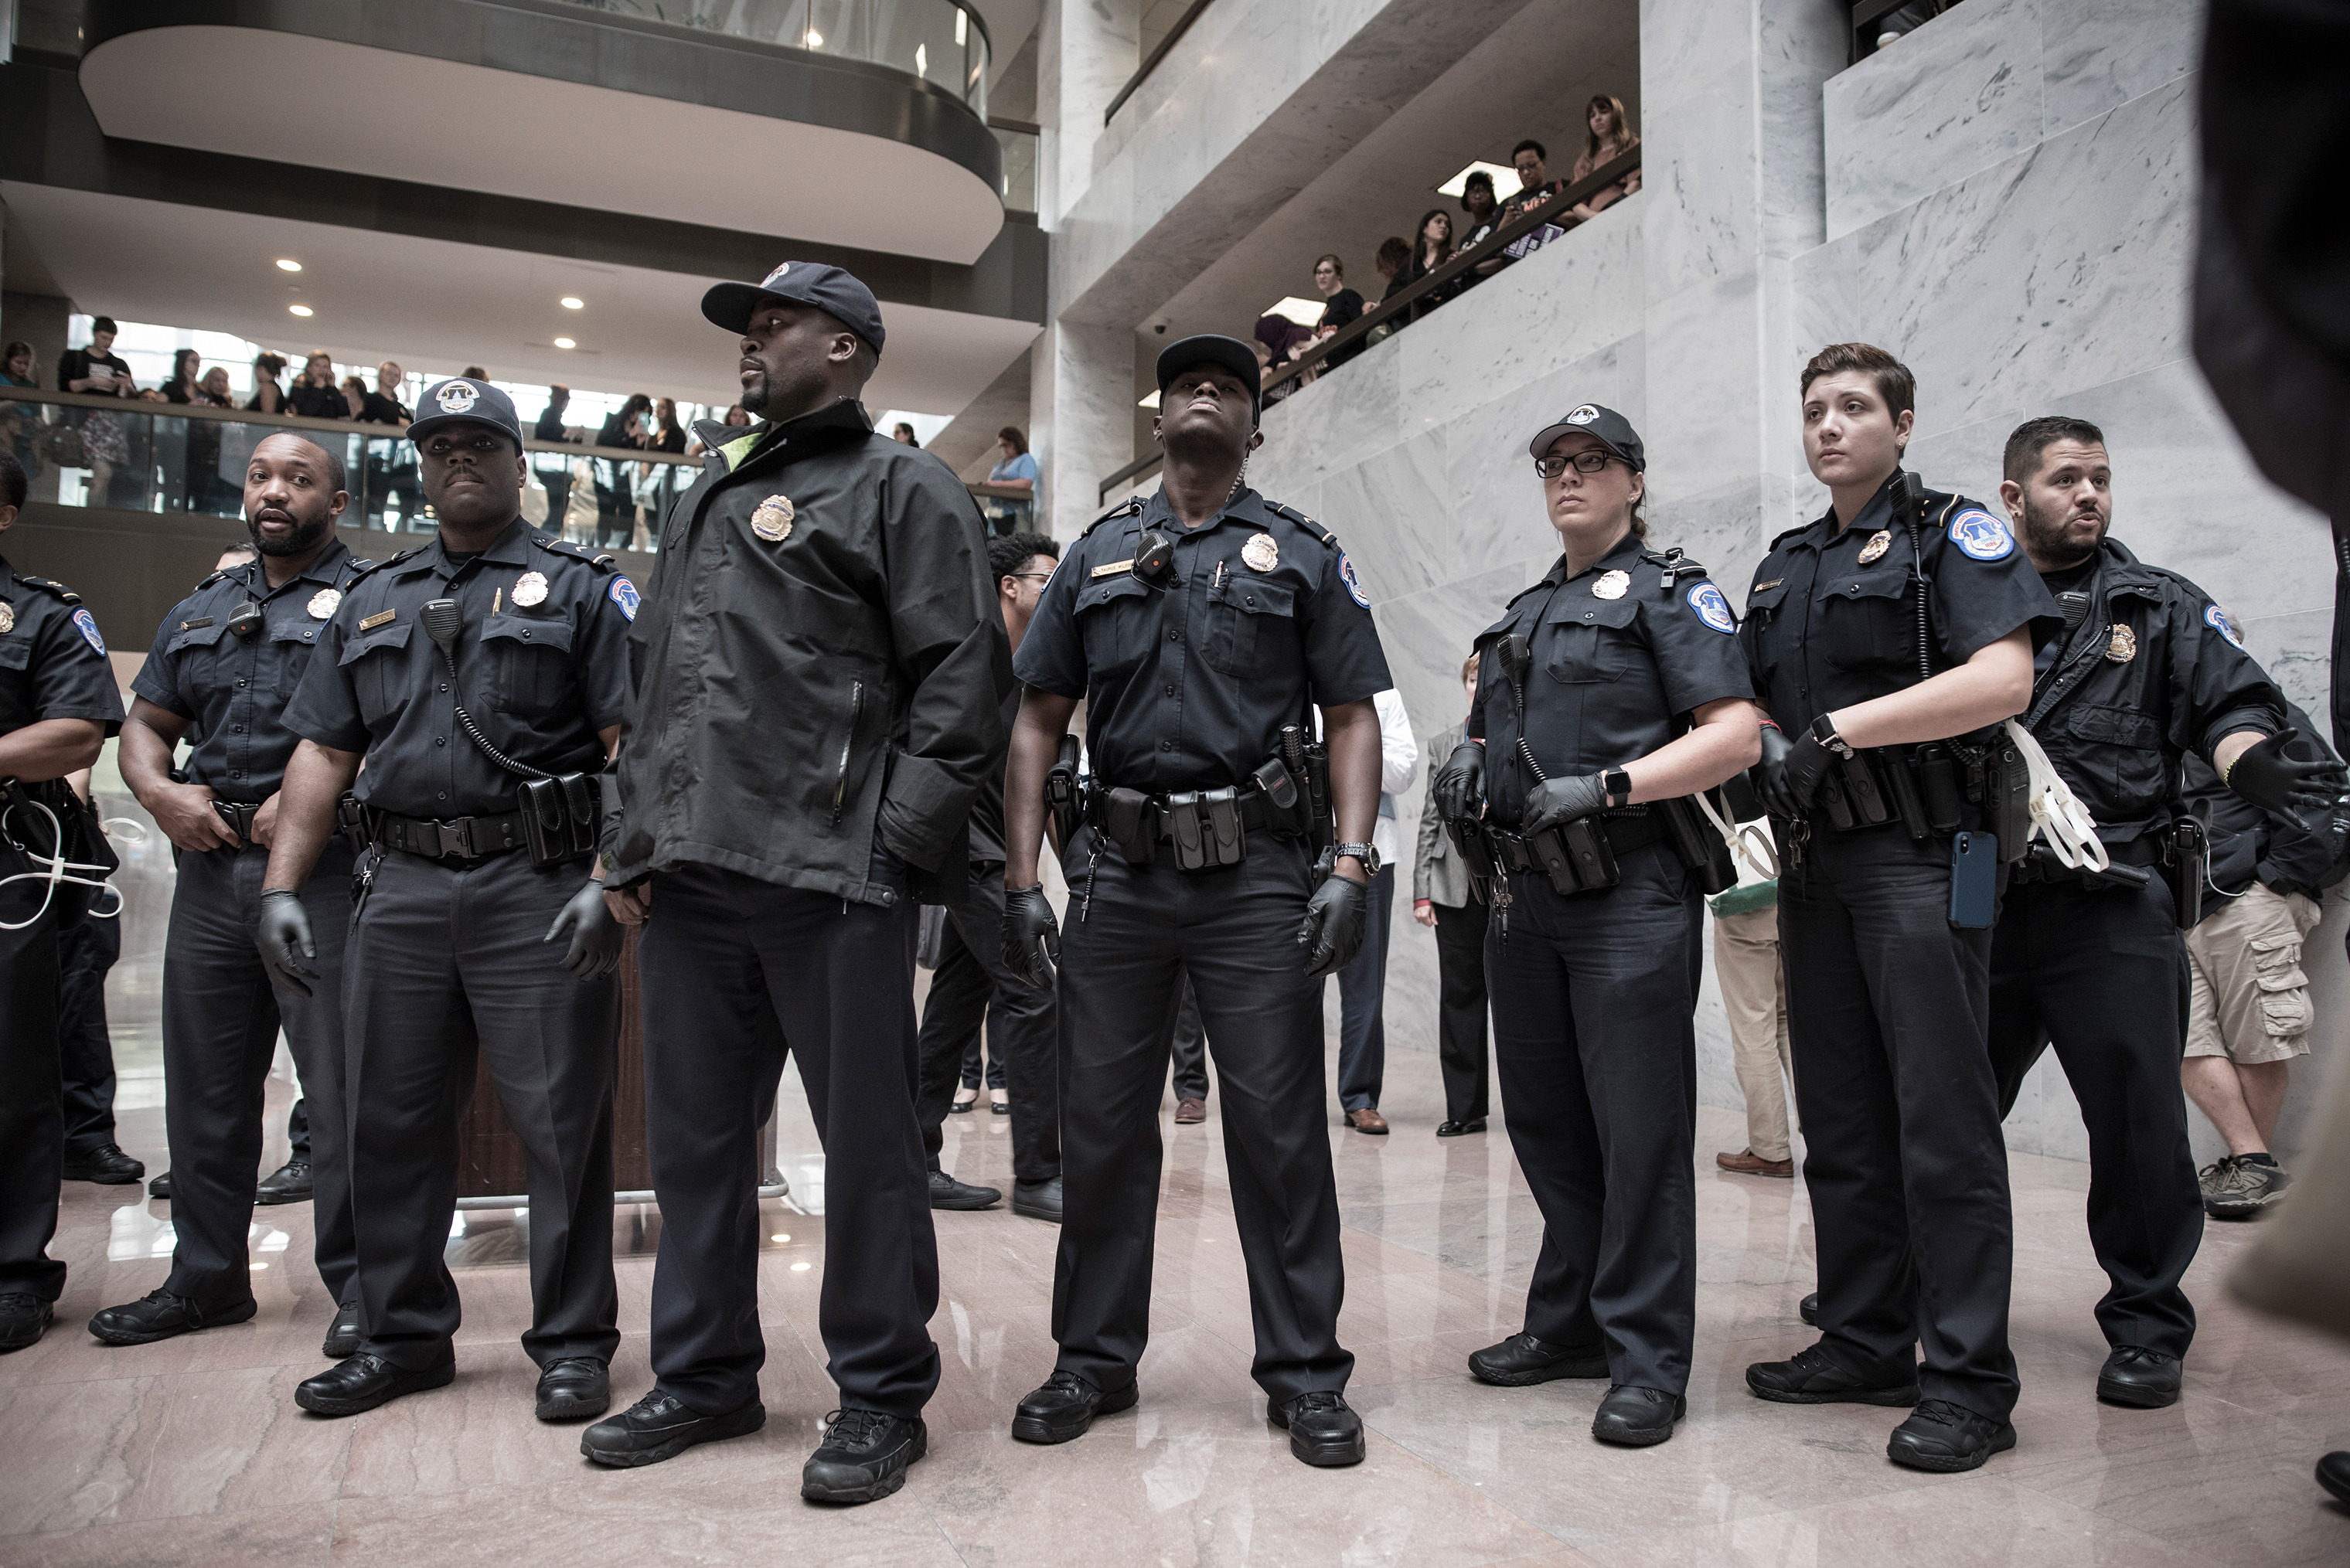 Police gathered to oversee protesters on the ground floor of the Hart Senate Office Building, which is near where the hearing will take place. (David Butow—Redux for TIME)